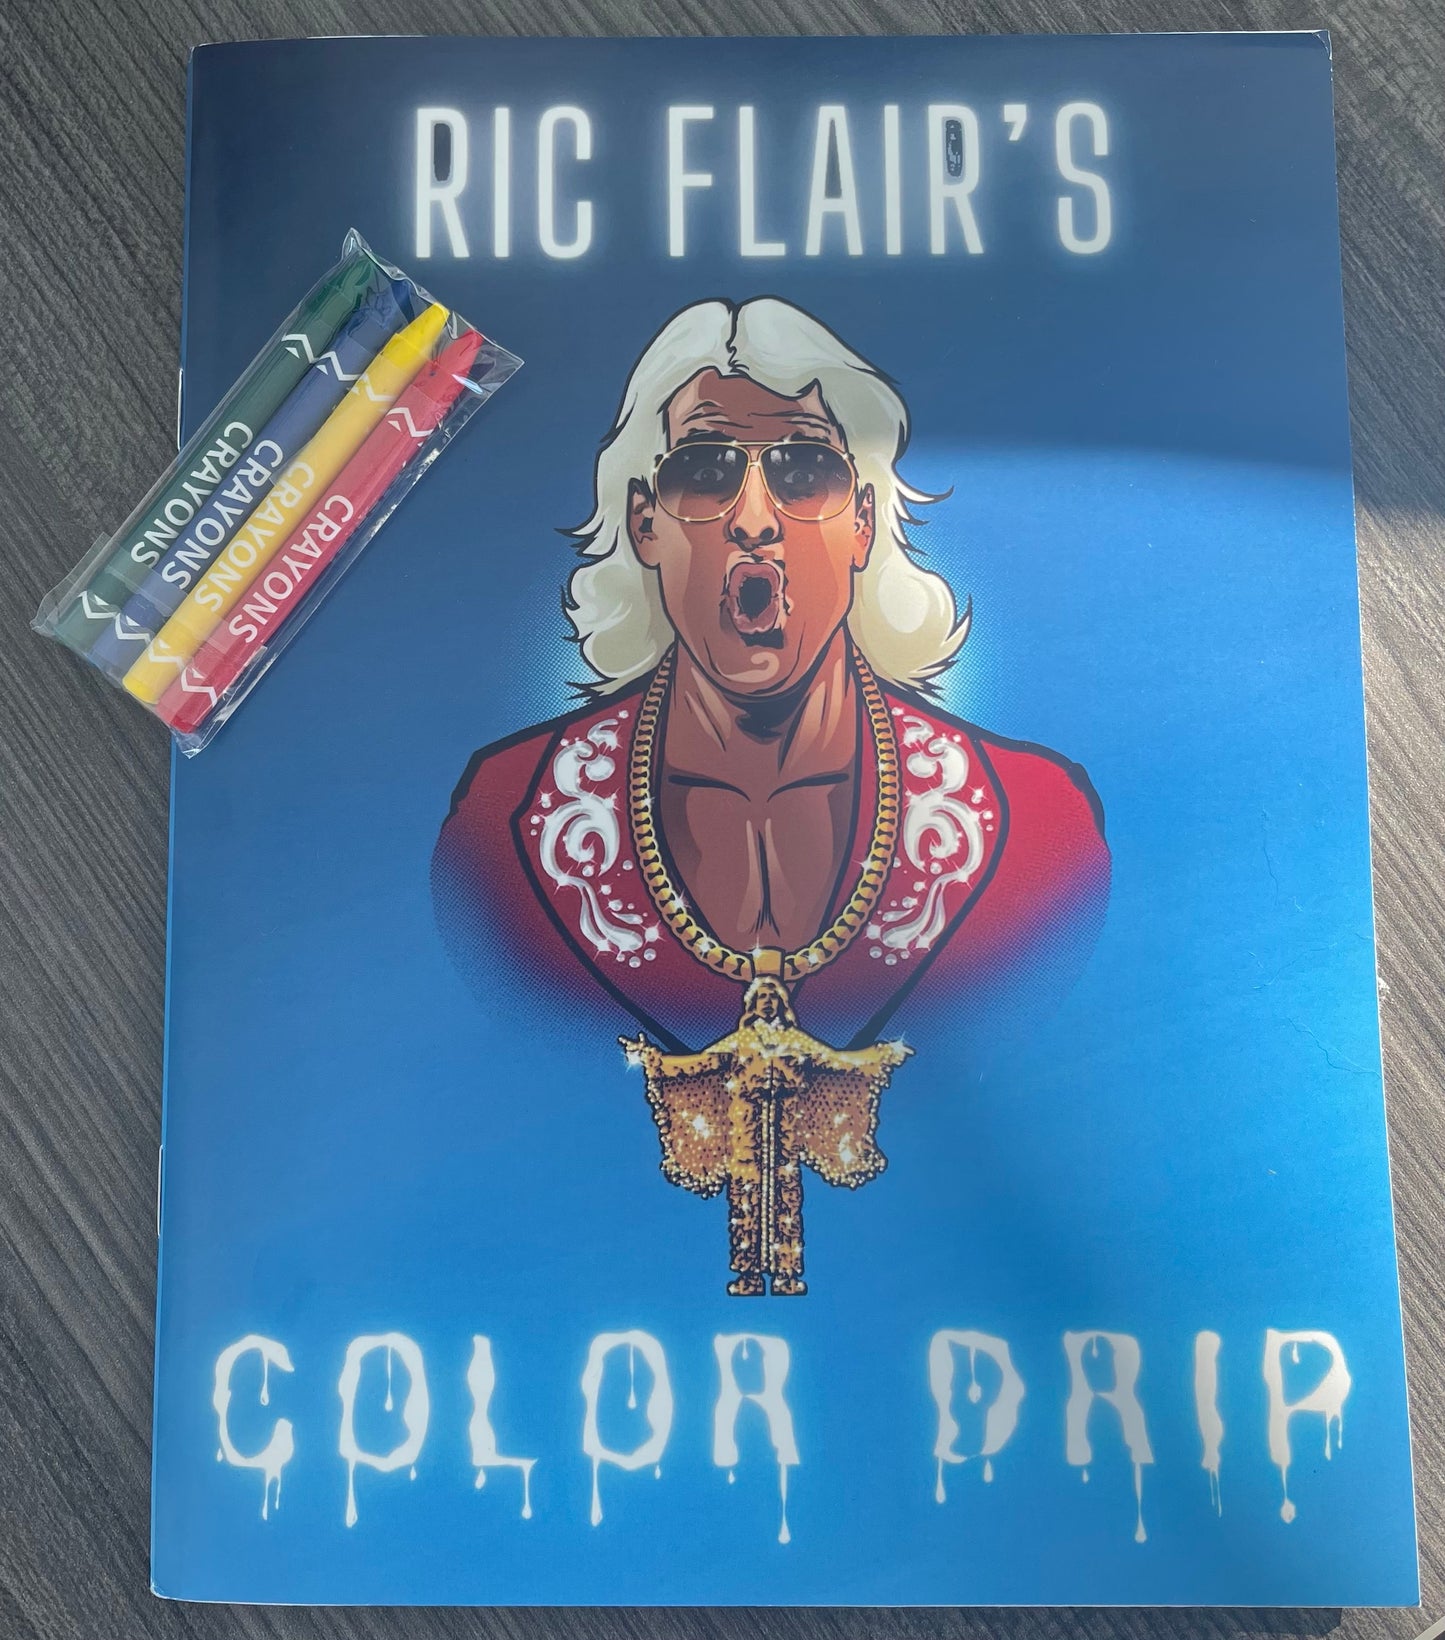 Autographed Limited Edition Ric Flair Coloring Book